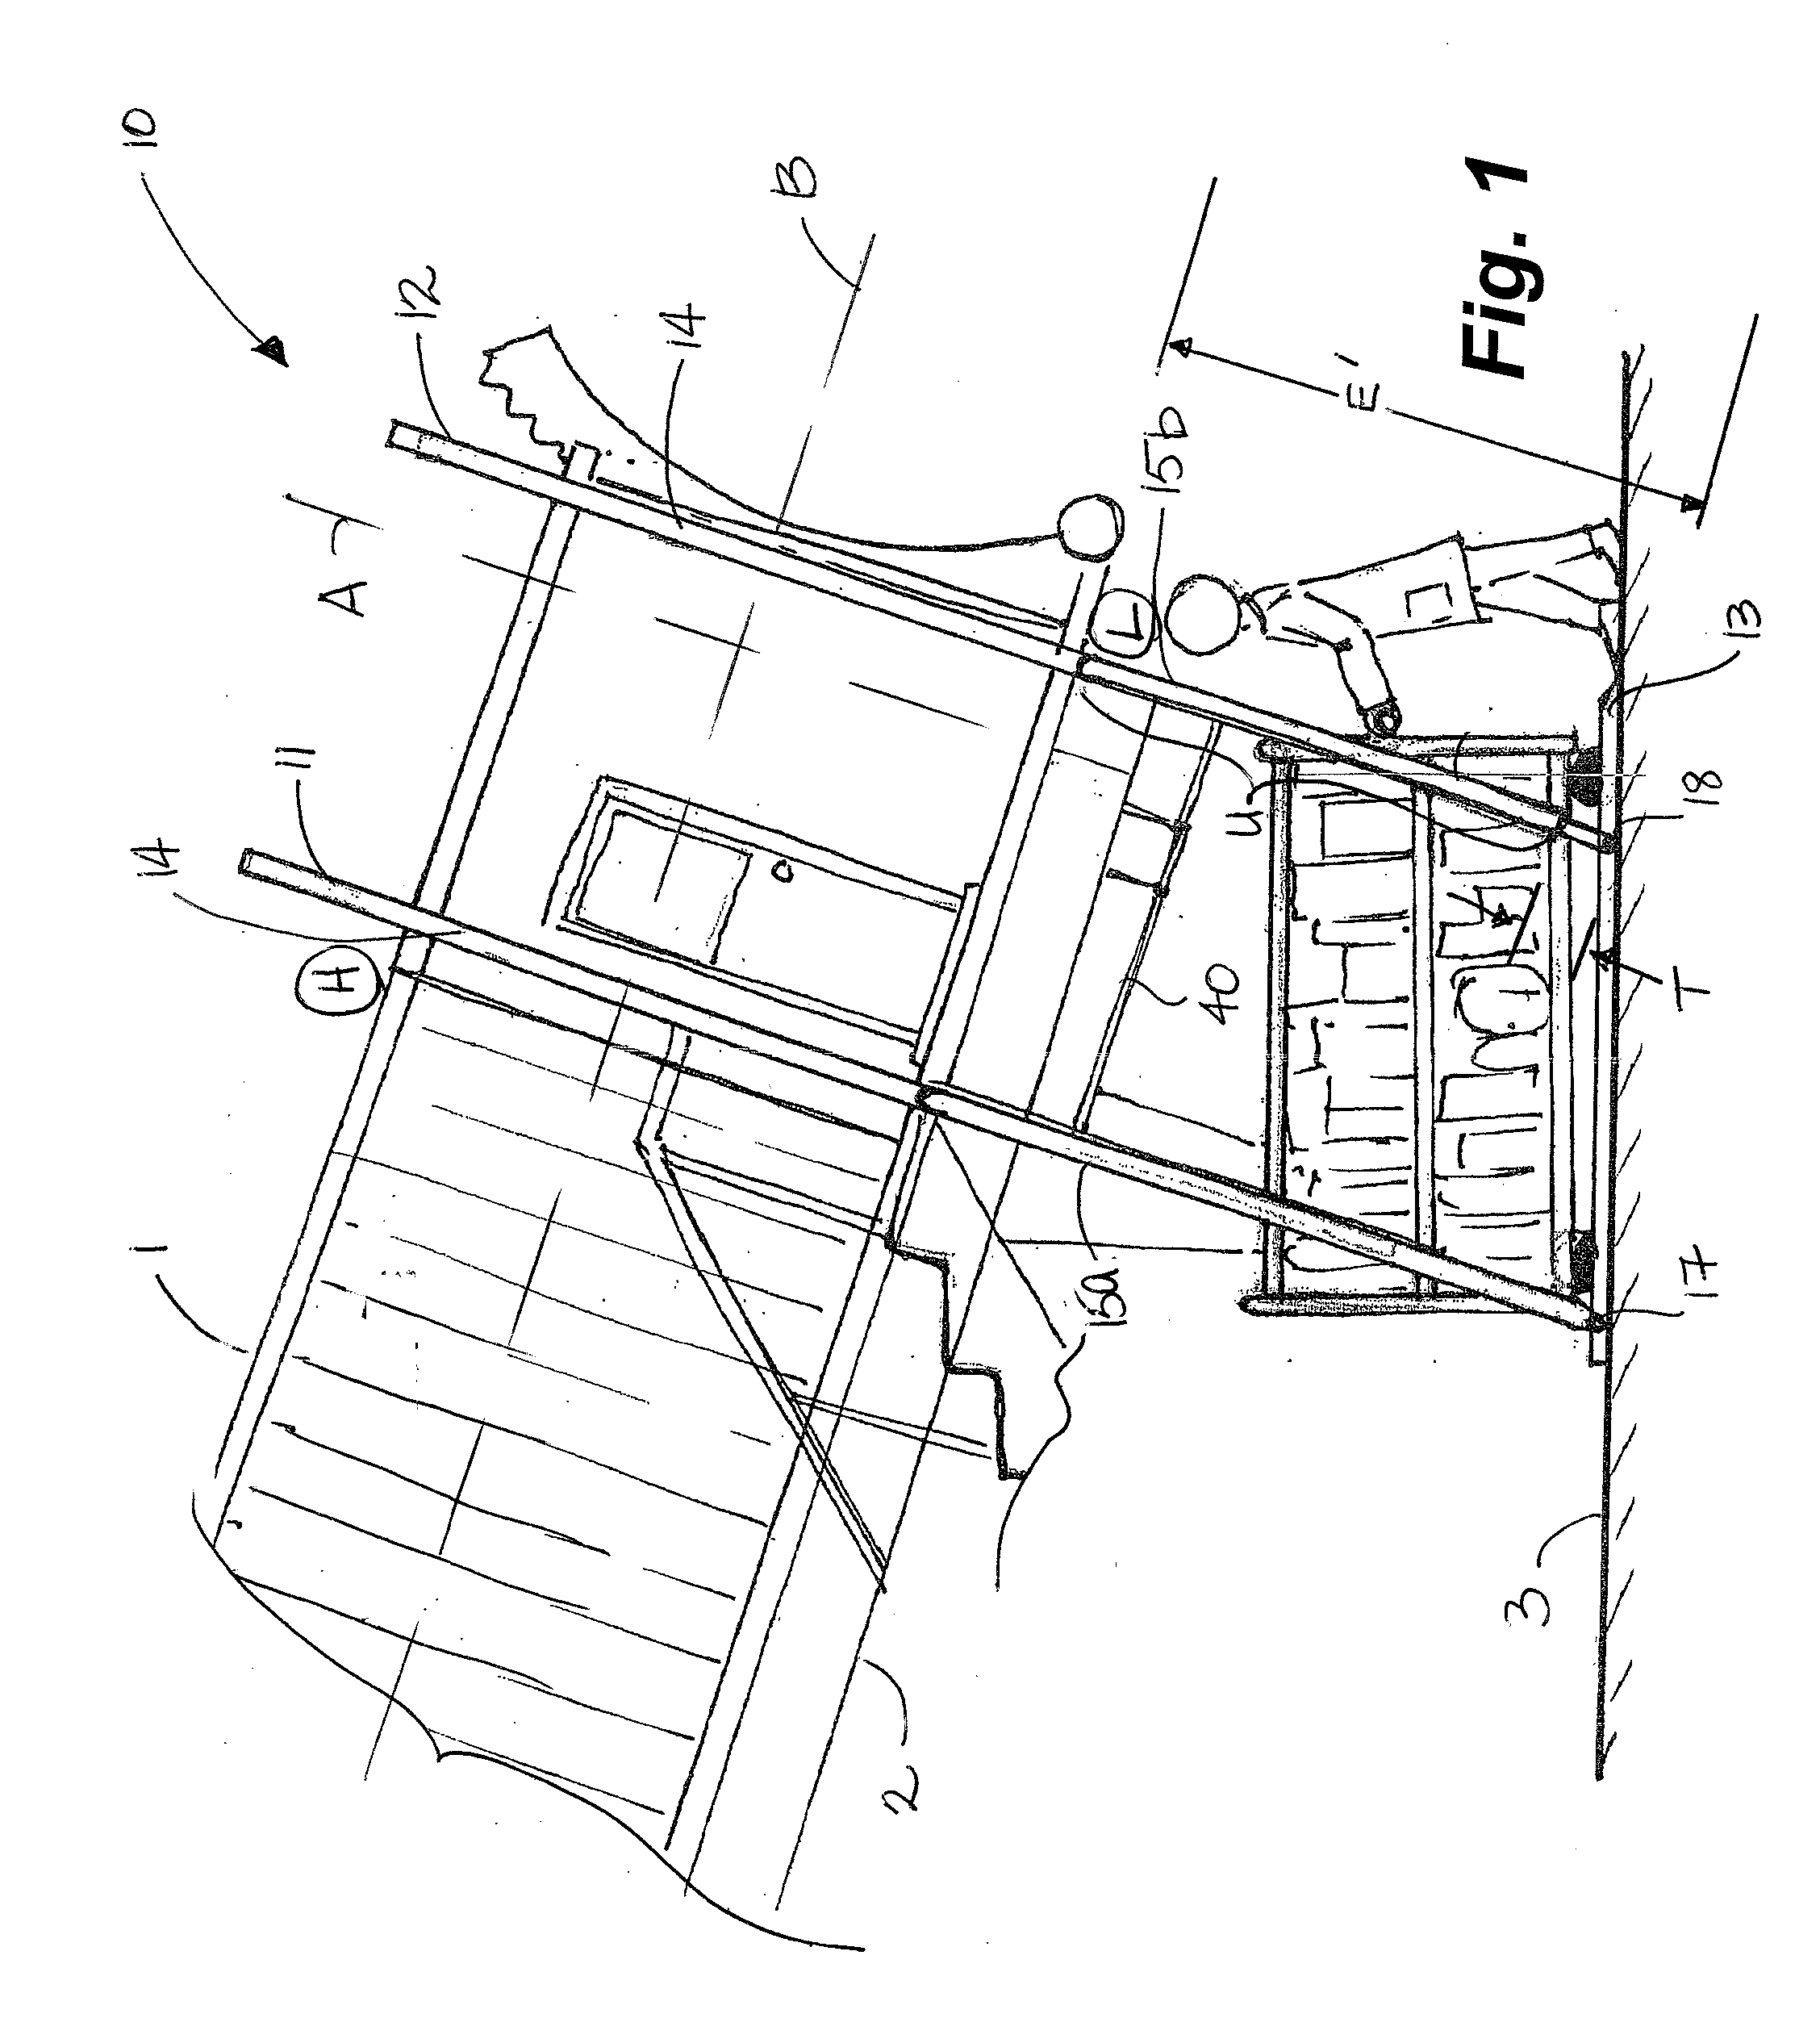 Automatic baggage lift leveling and lift system and apparatus for supporting same from a moveable structure such as a jet bridge